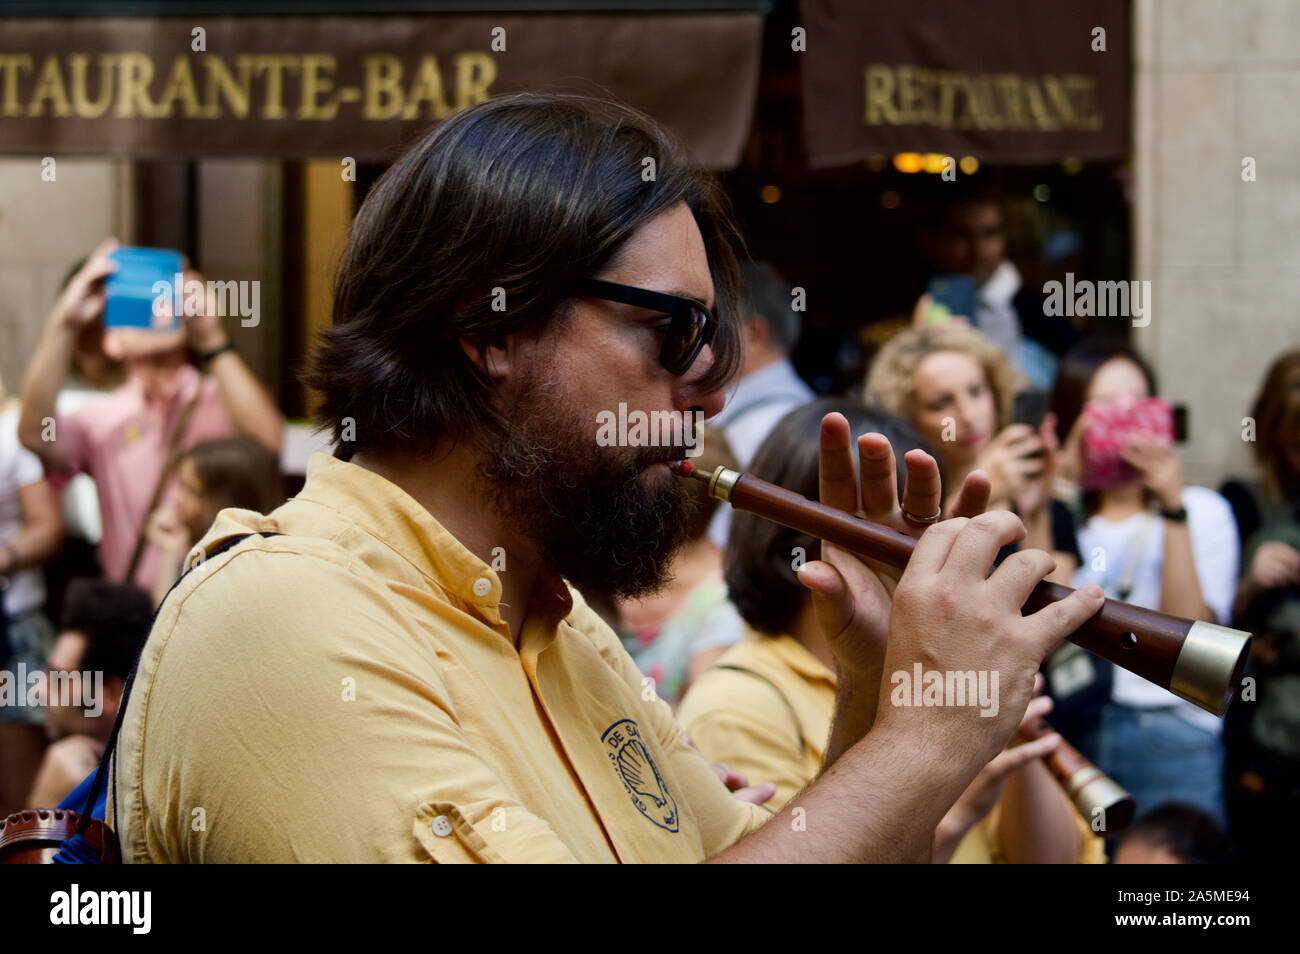 A man playing an instrument at the Giants Parade during La Merce Festival 2019 at Placa de Sant Jaume in Barcelona, Spain Stock Photo